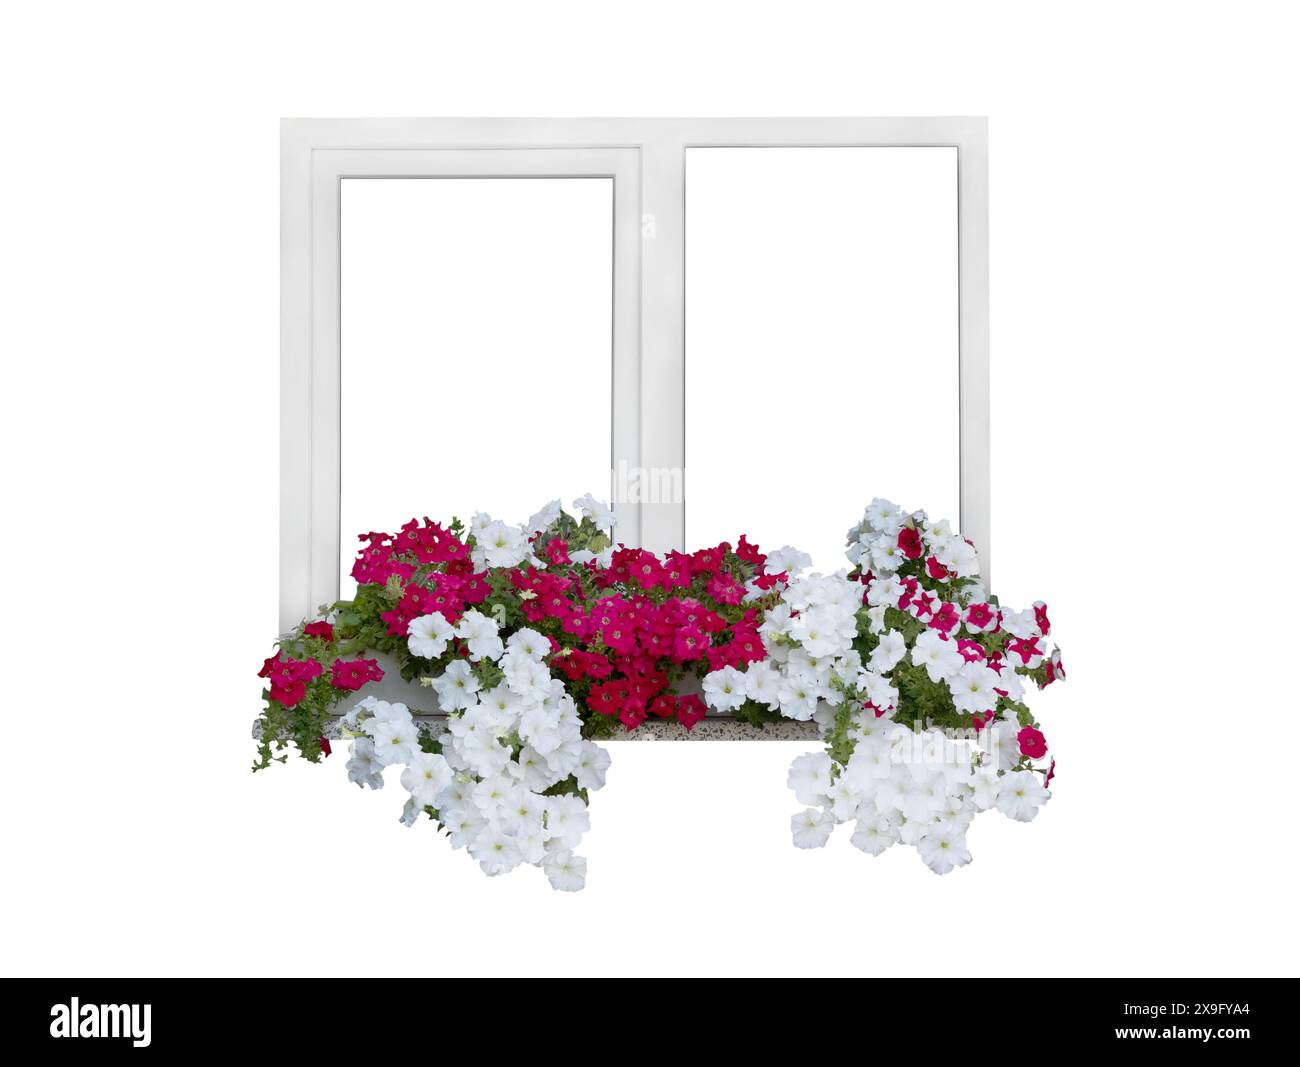 window with petunia flowers isolated on white background Stock Photo